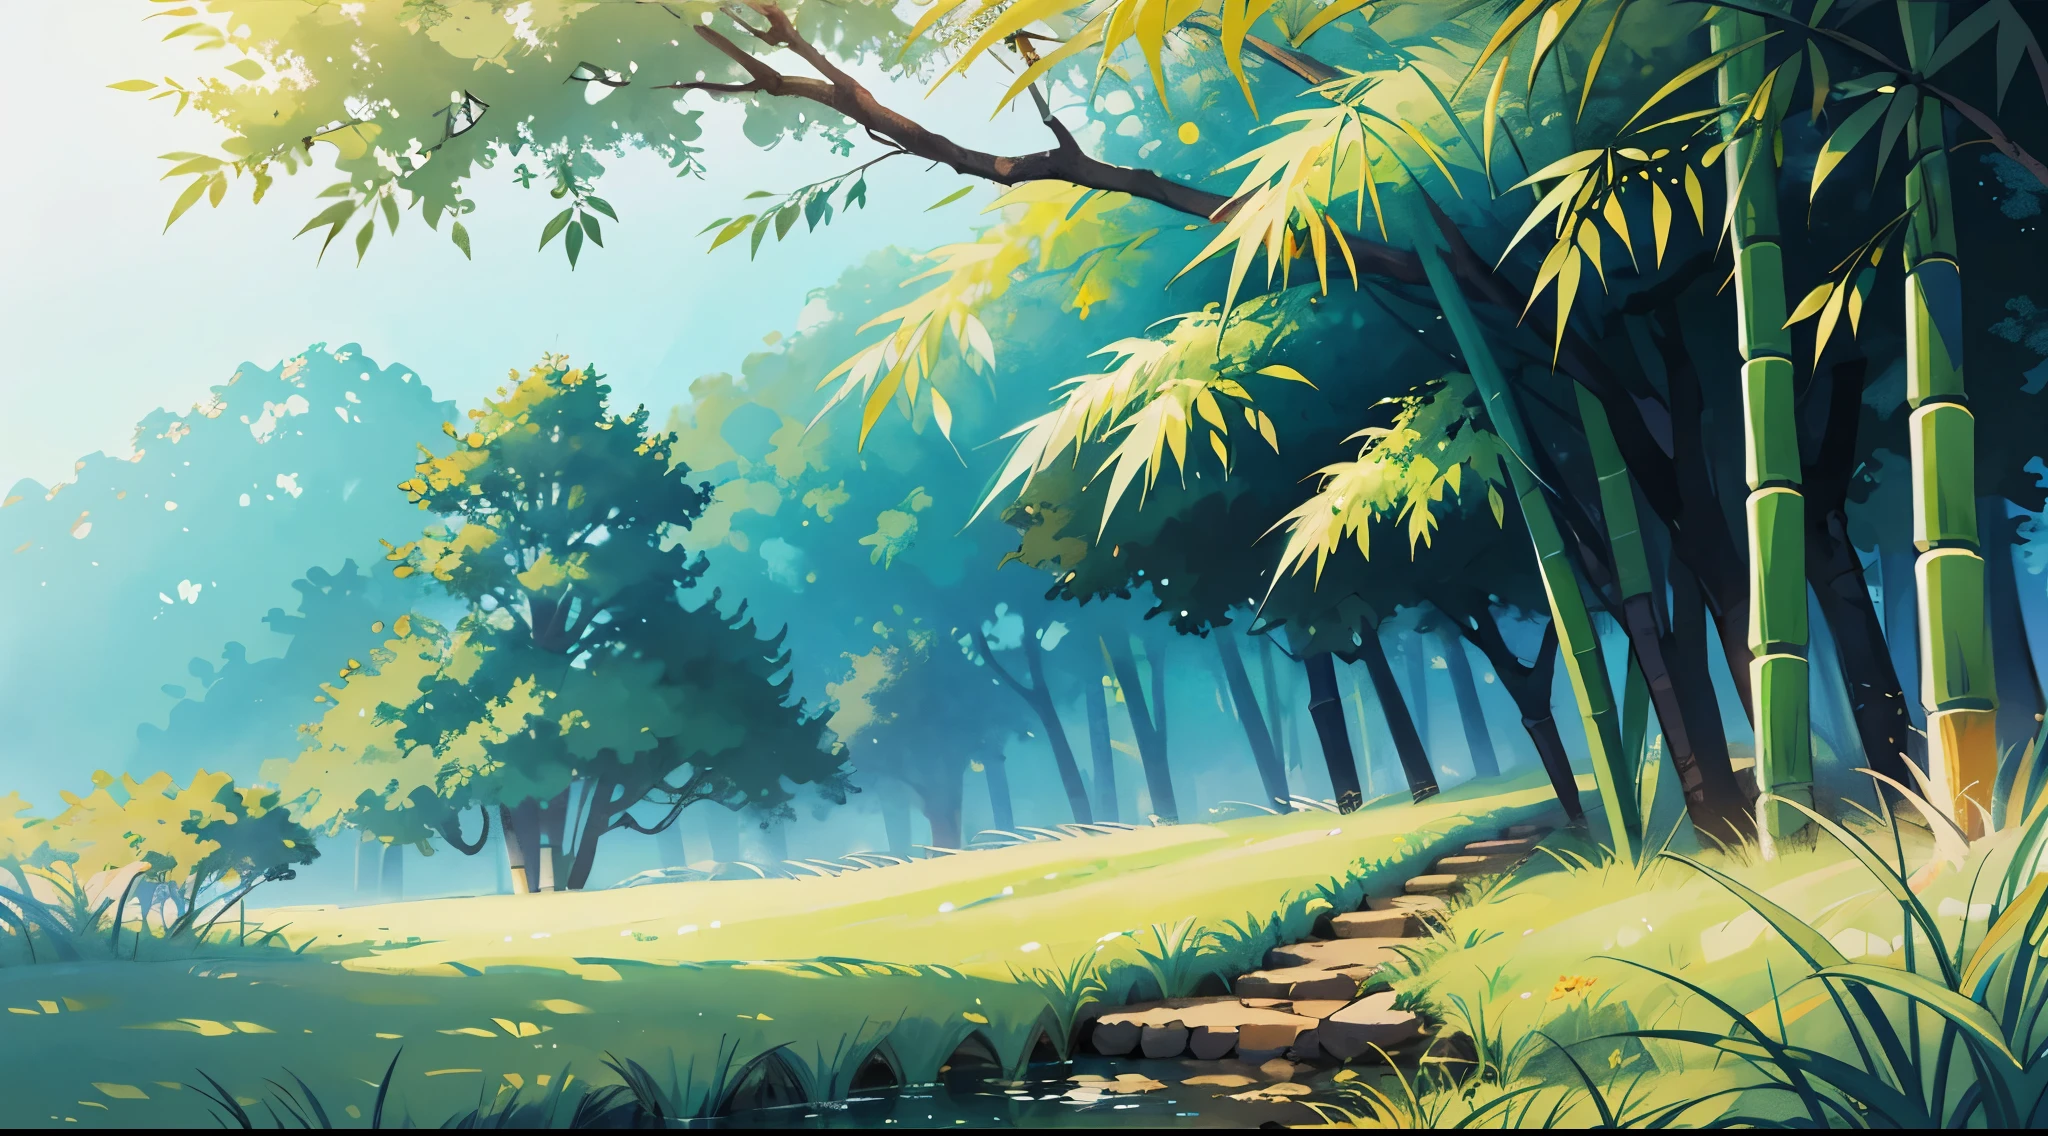 masterpiece, best quality, detailed, bamboo, forest, outdoor, landscape illustration